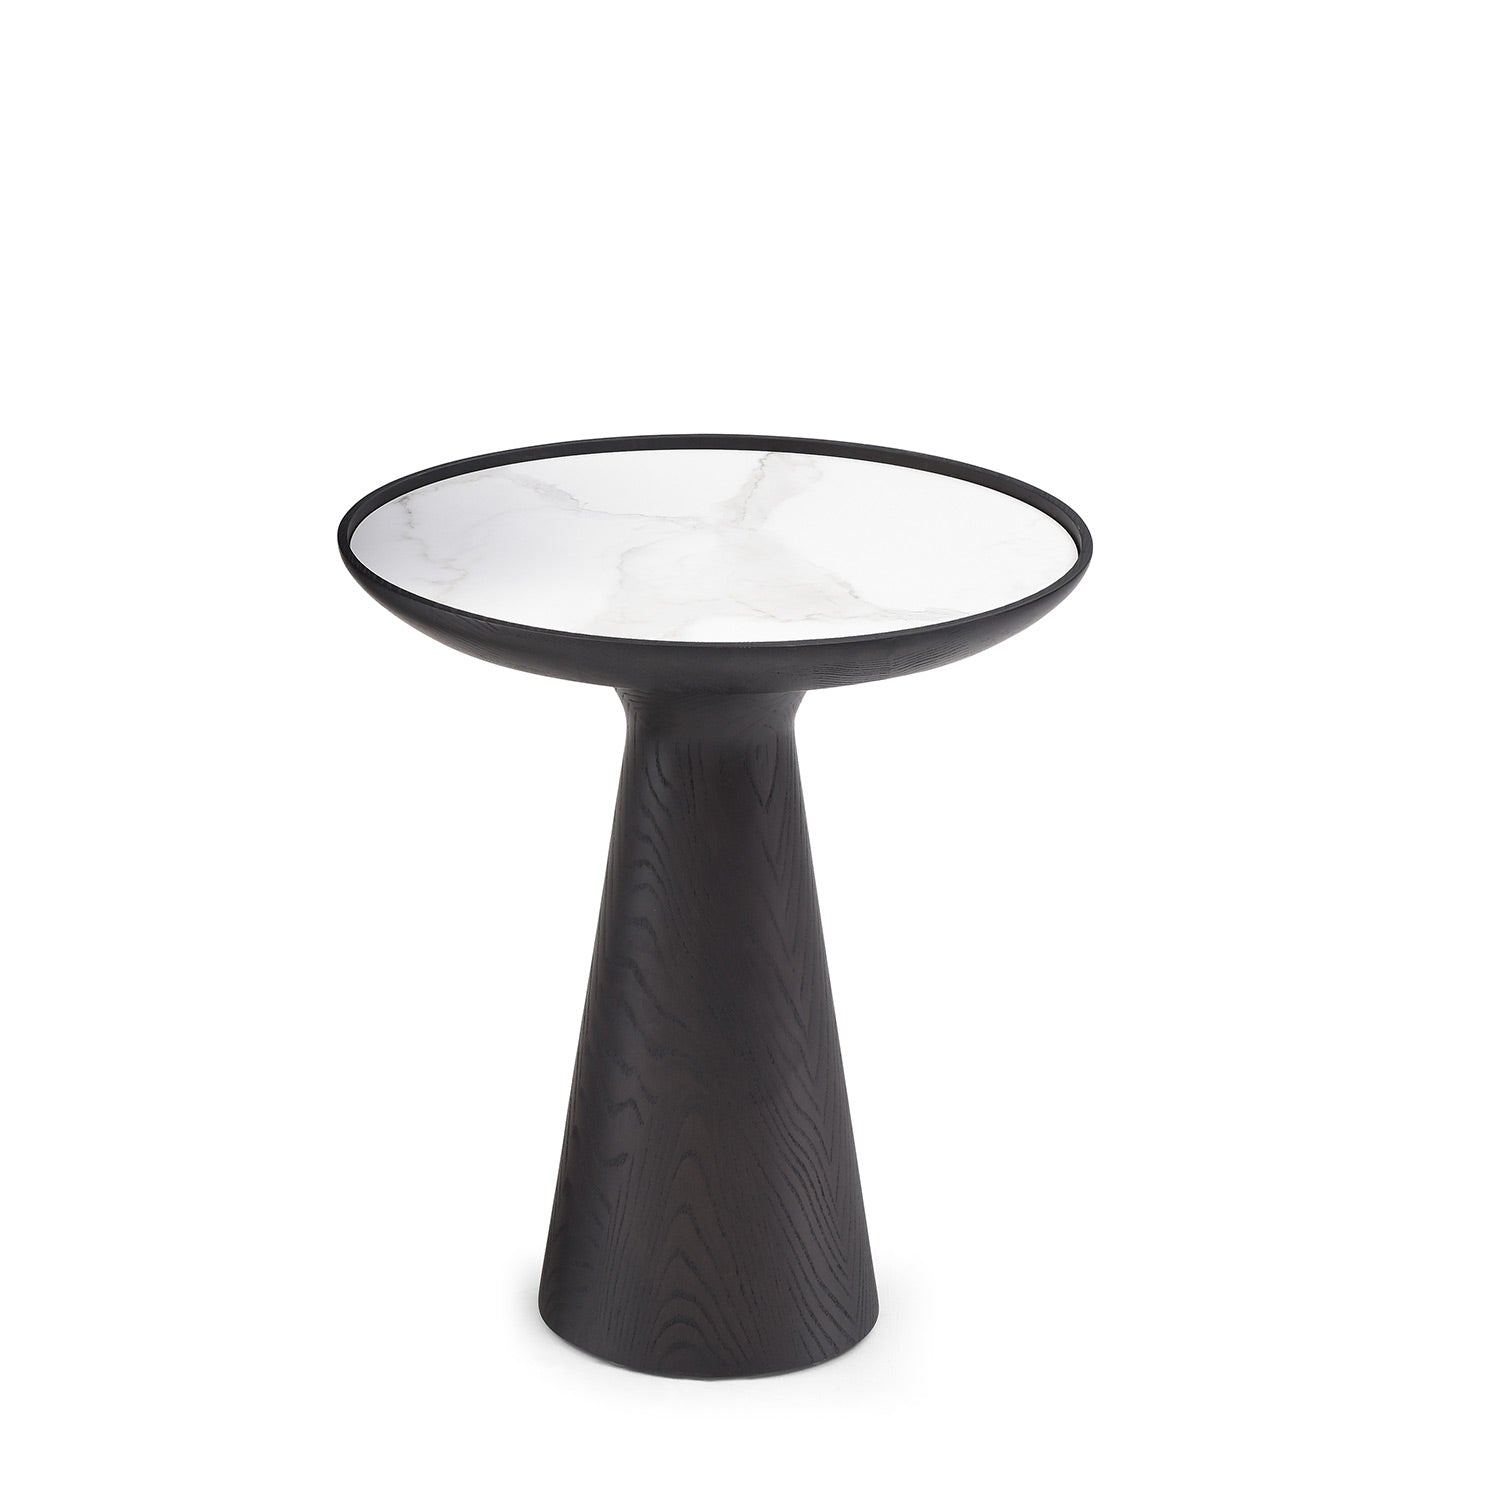 Piombino low side table